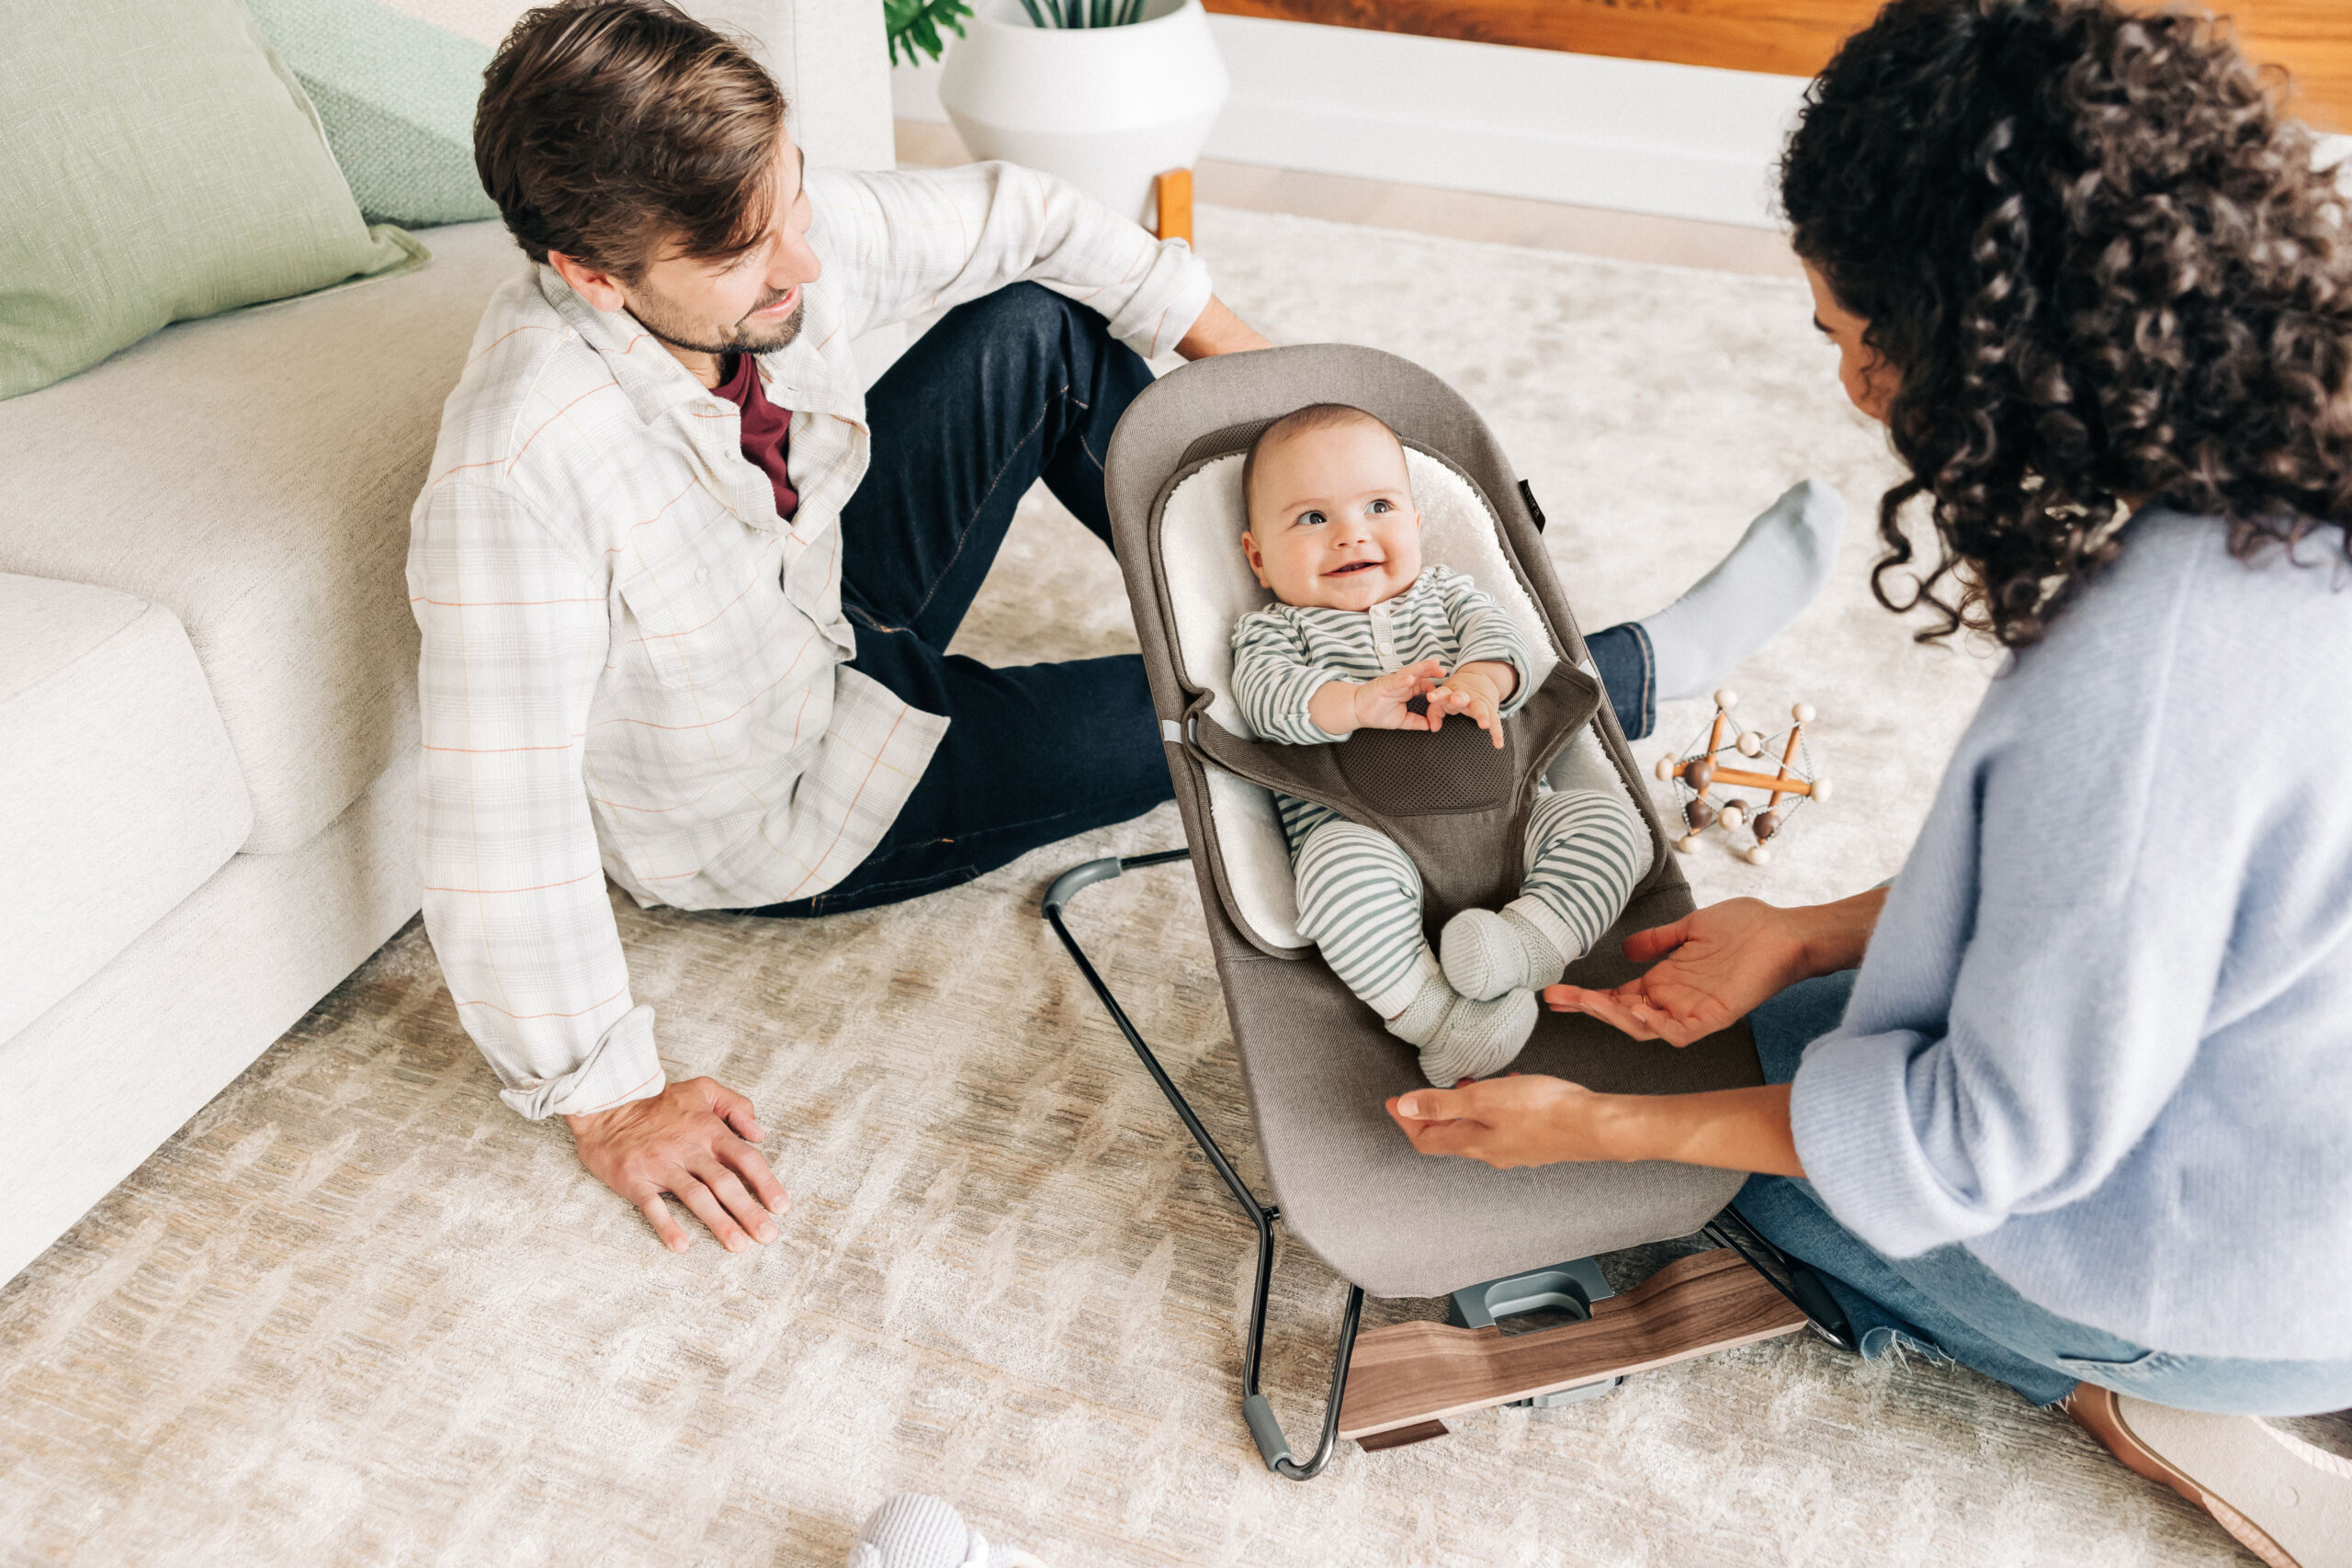 A candid moment with a baby smiling joyfully in the UPPAbaby Mira Bouncer placed on a living room rug, surrounded by relaxed parents engaging with the child, highlighting the bouncer's use in a family setting.